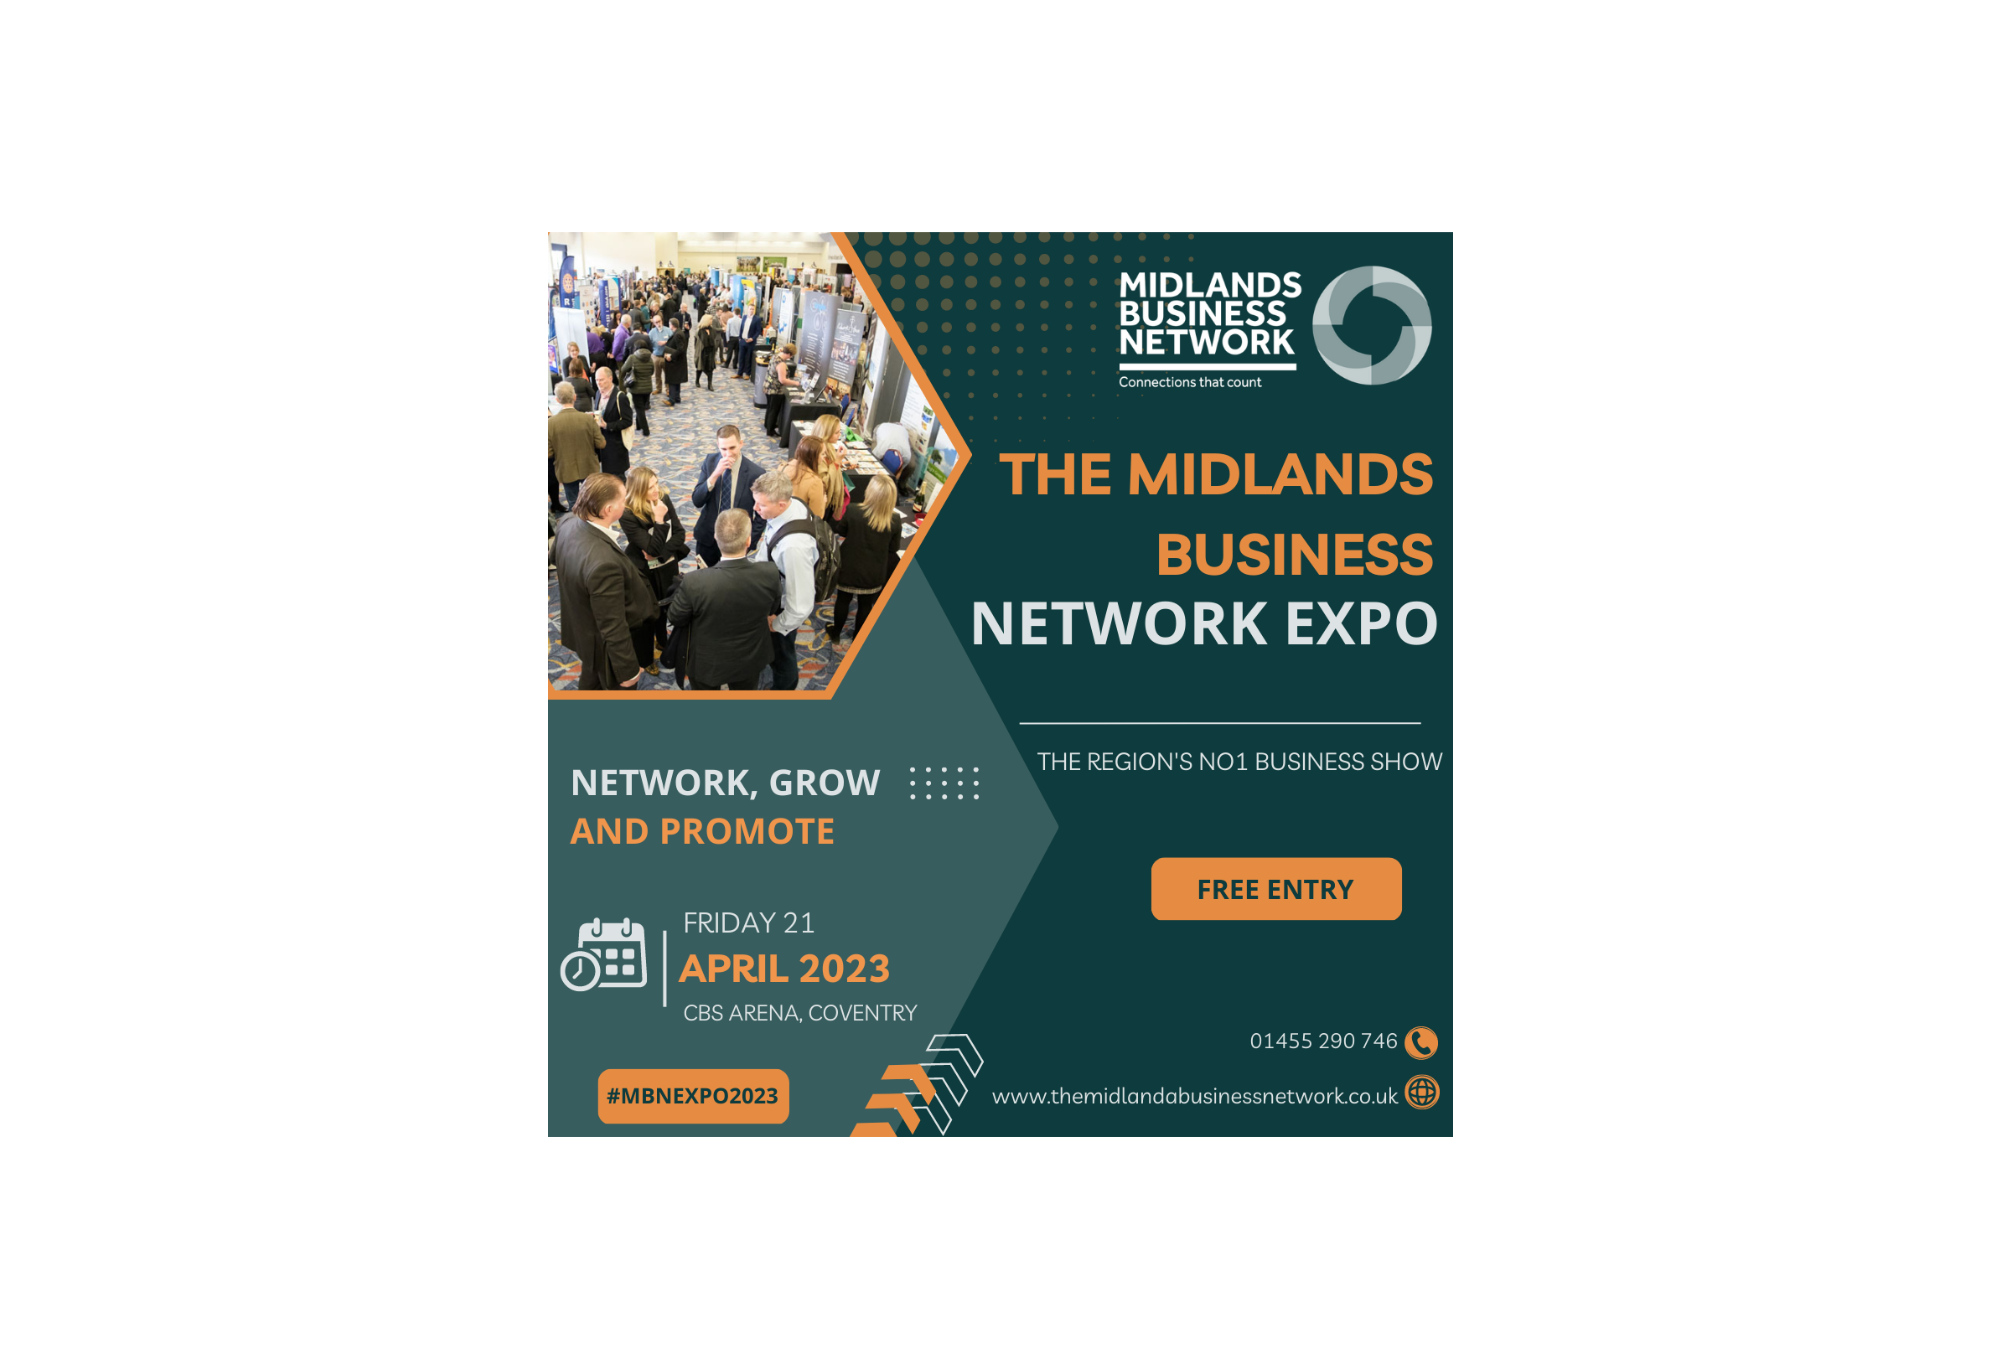 BTTJ exhibits at the Midlands Business Network Expo